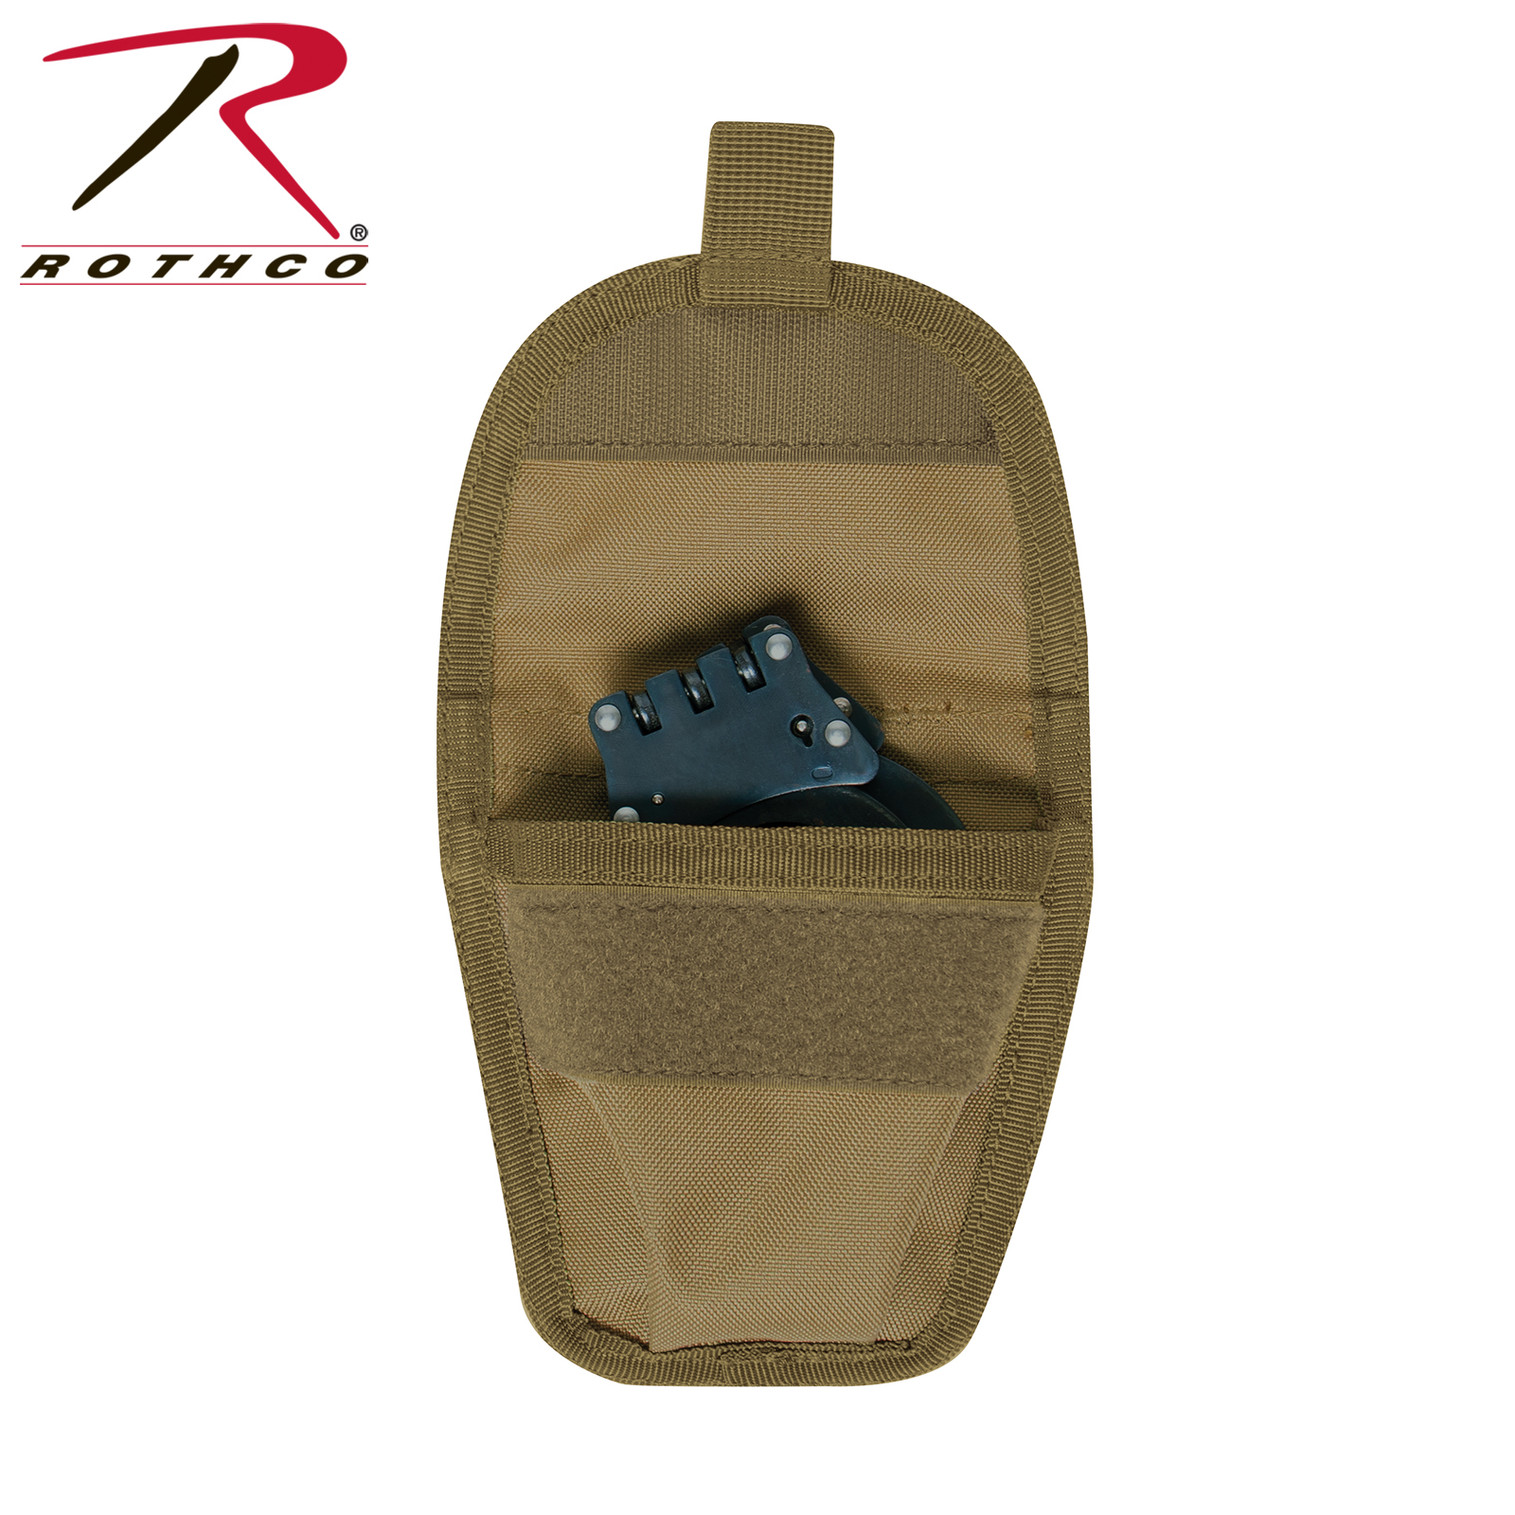 Rothco MOLLE Handcuff Pouch - Coyote Brown